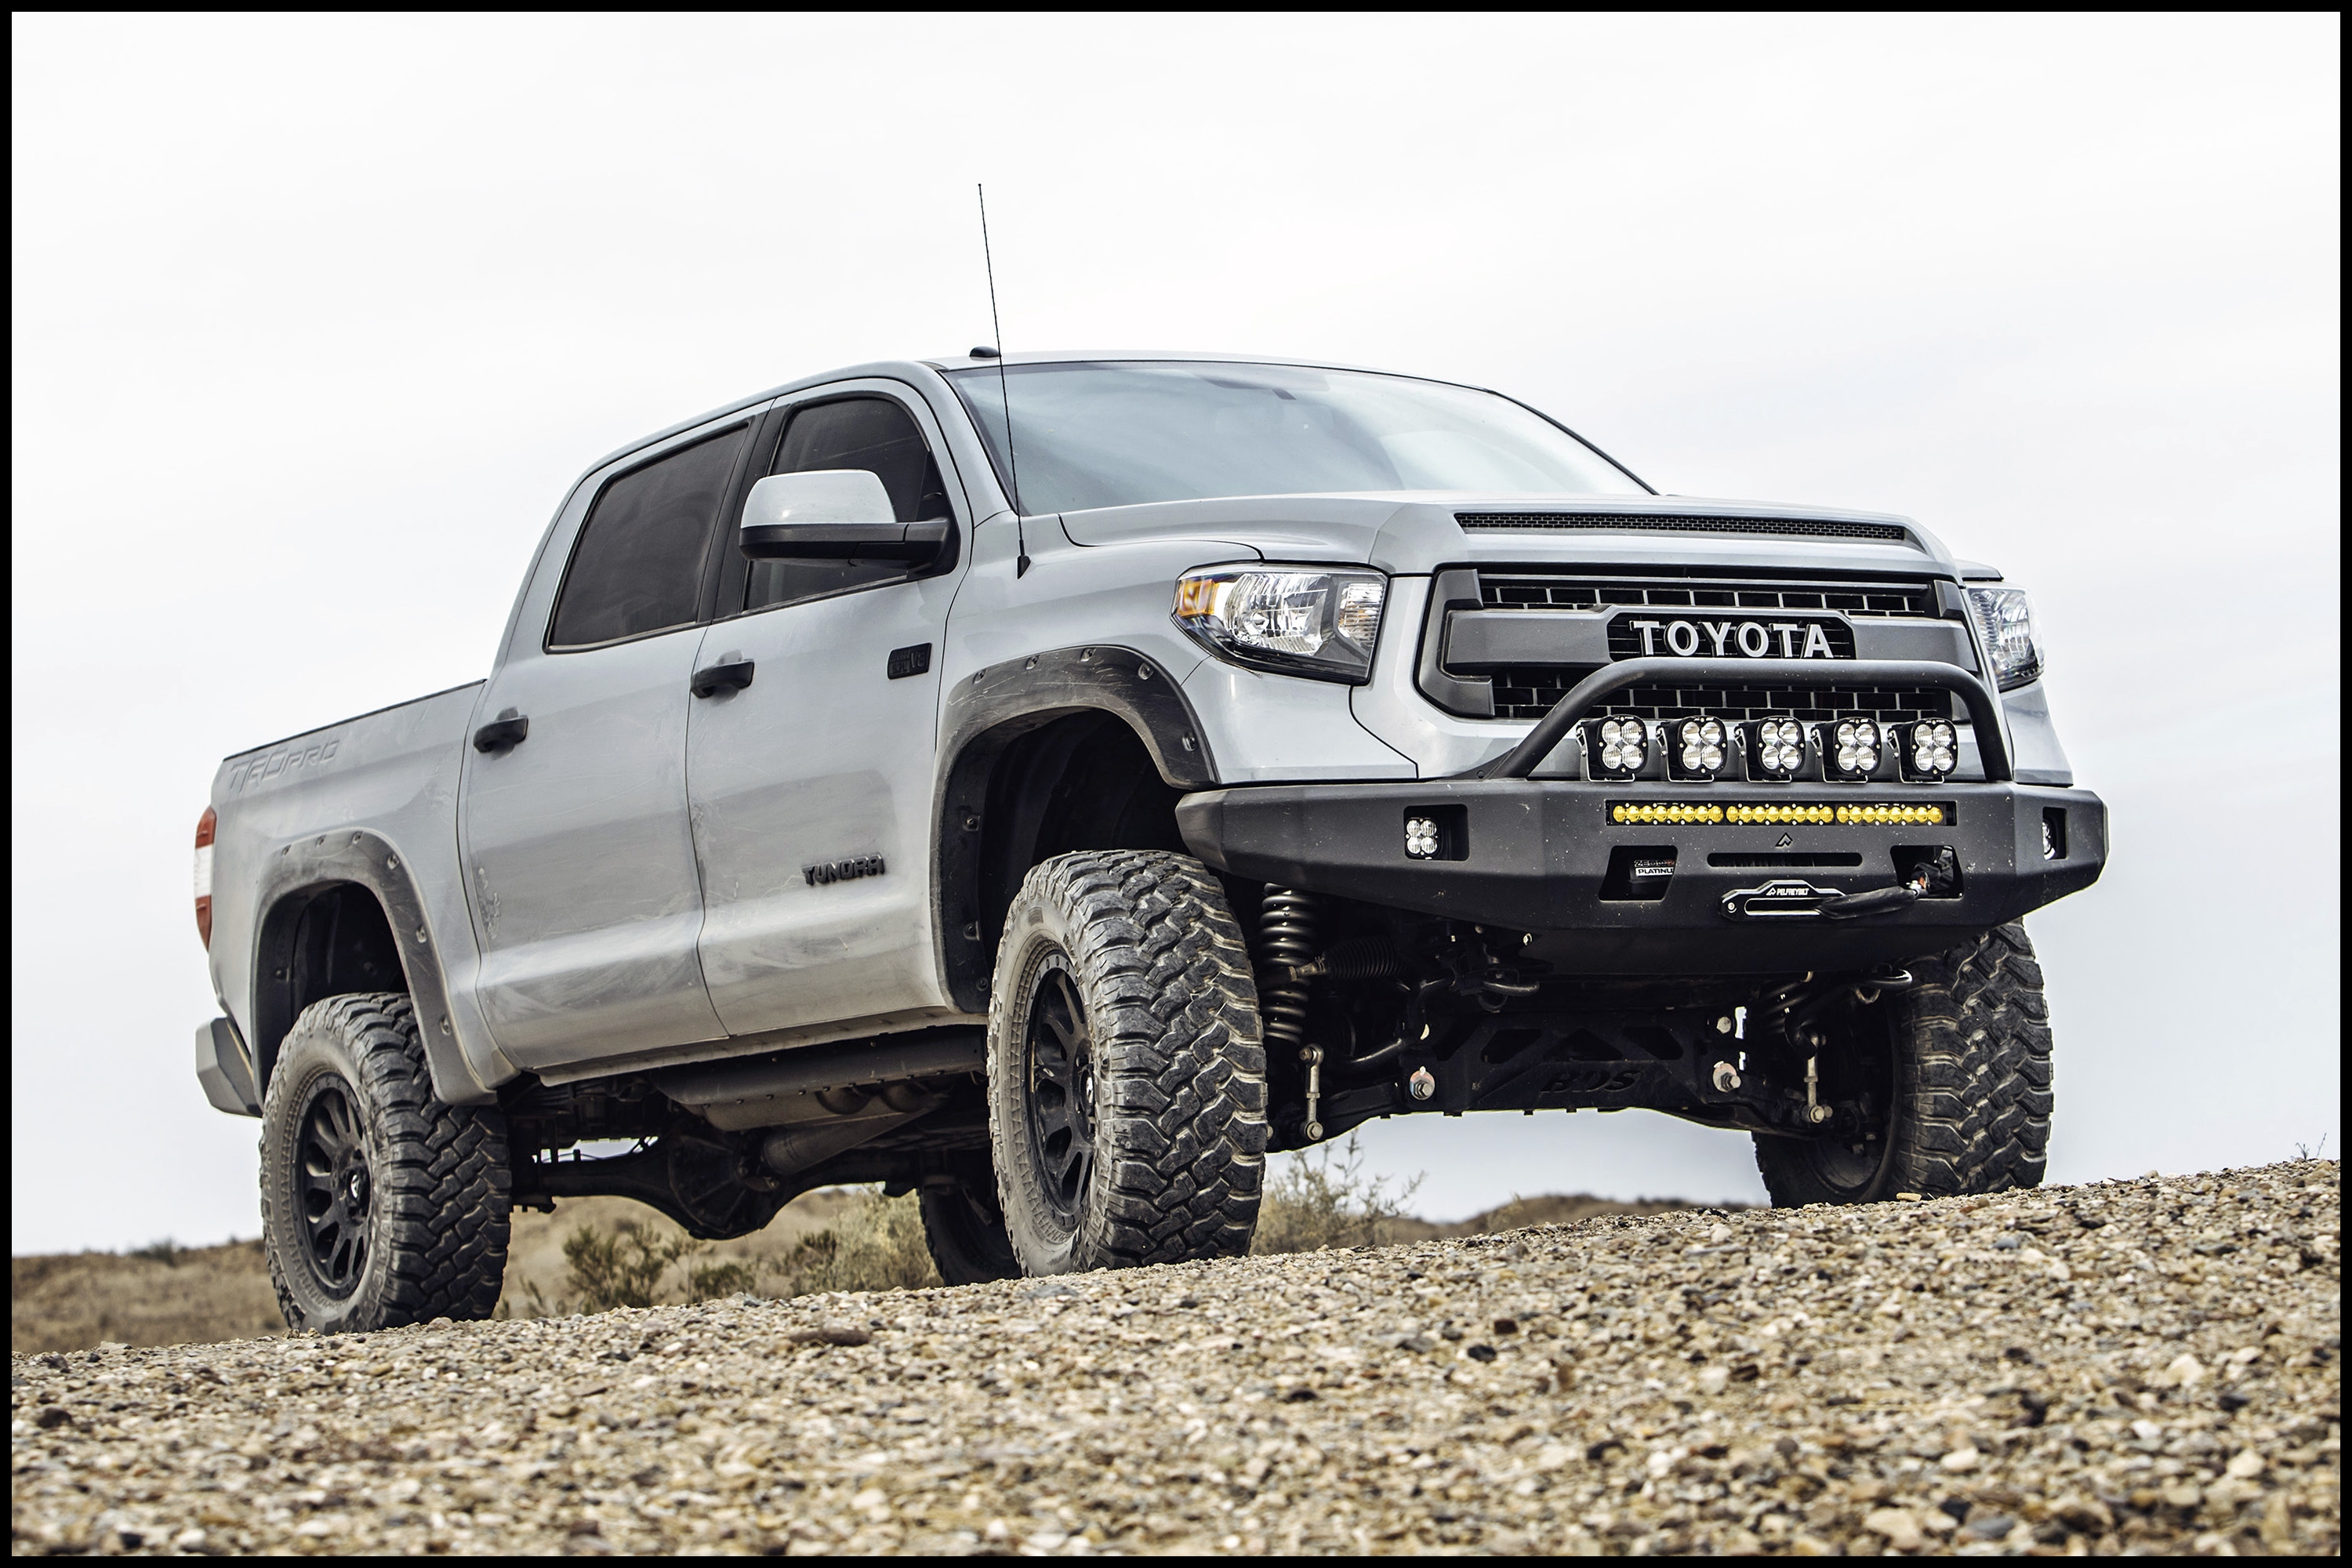 Hot 2016 toyota Tundra Lift Kits by Bds Suspension Redesign and Price